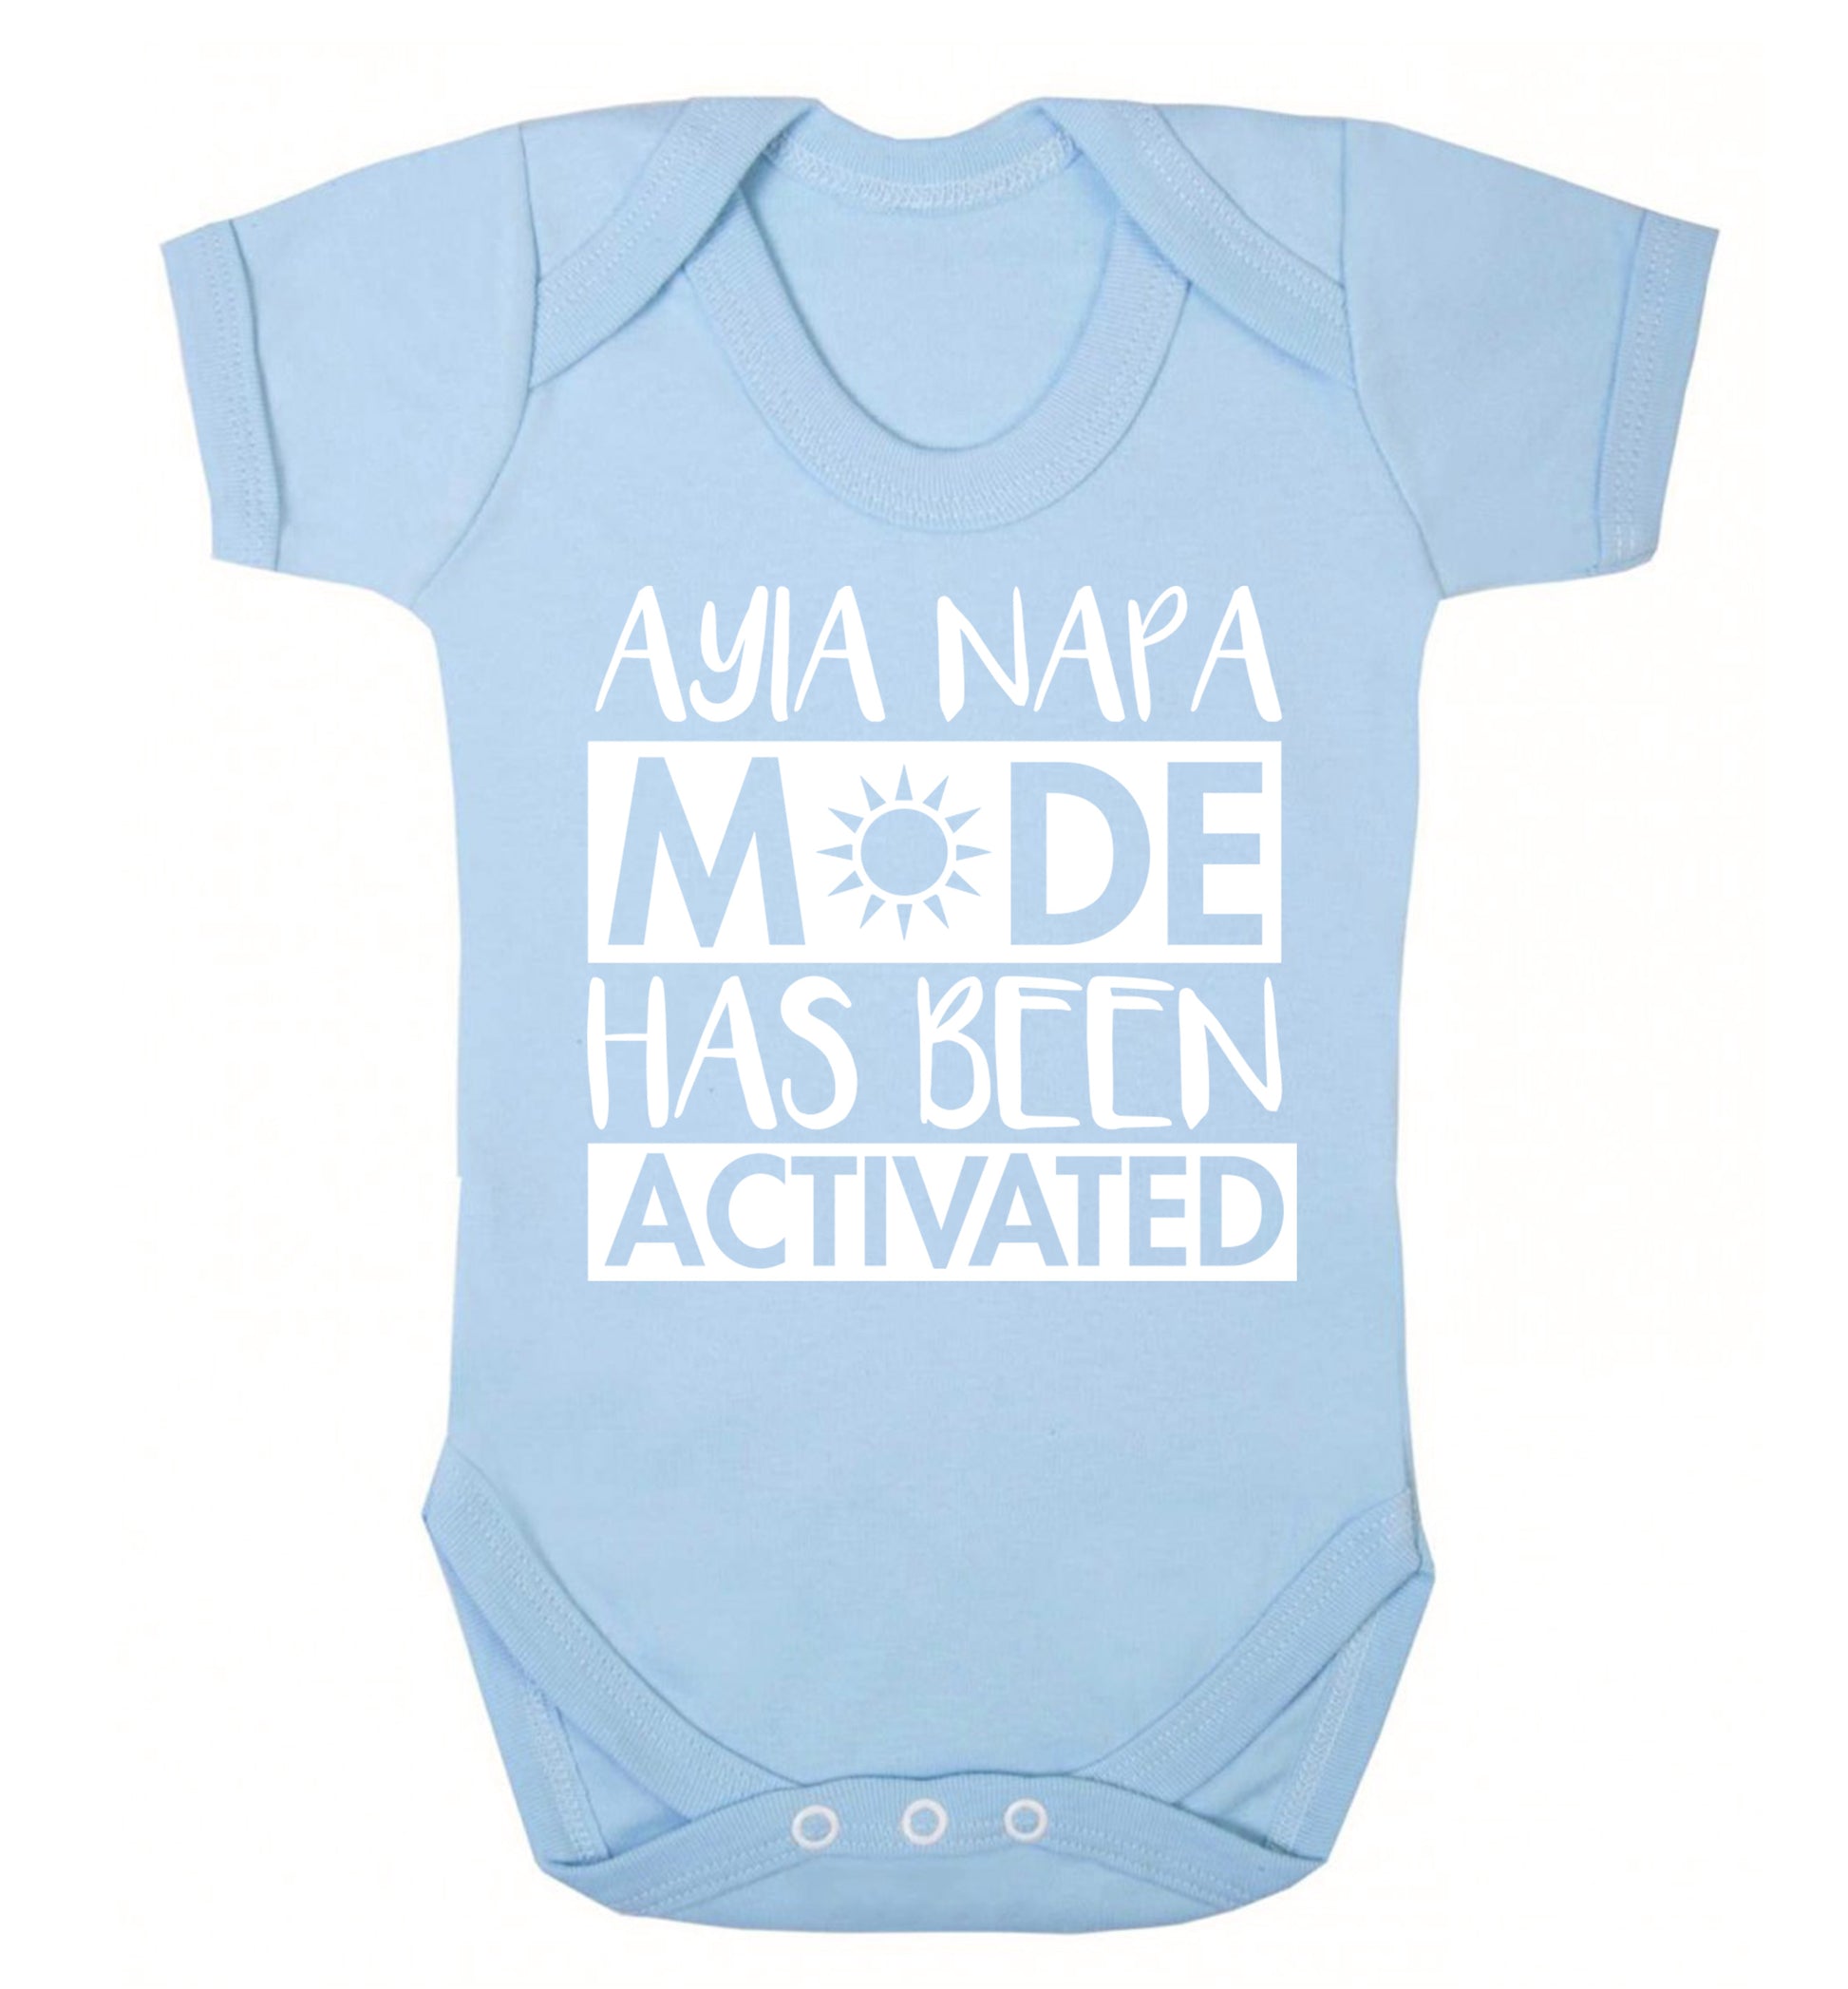 Ayia Napa mode has been activated Baby Vest pale blue 18-24 months